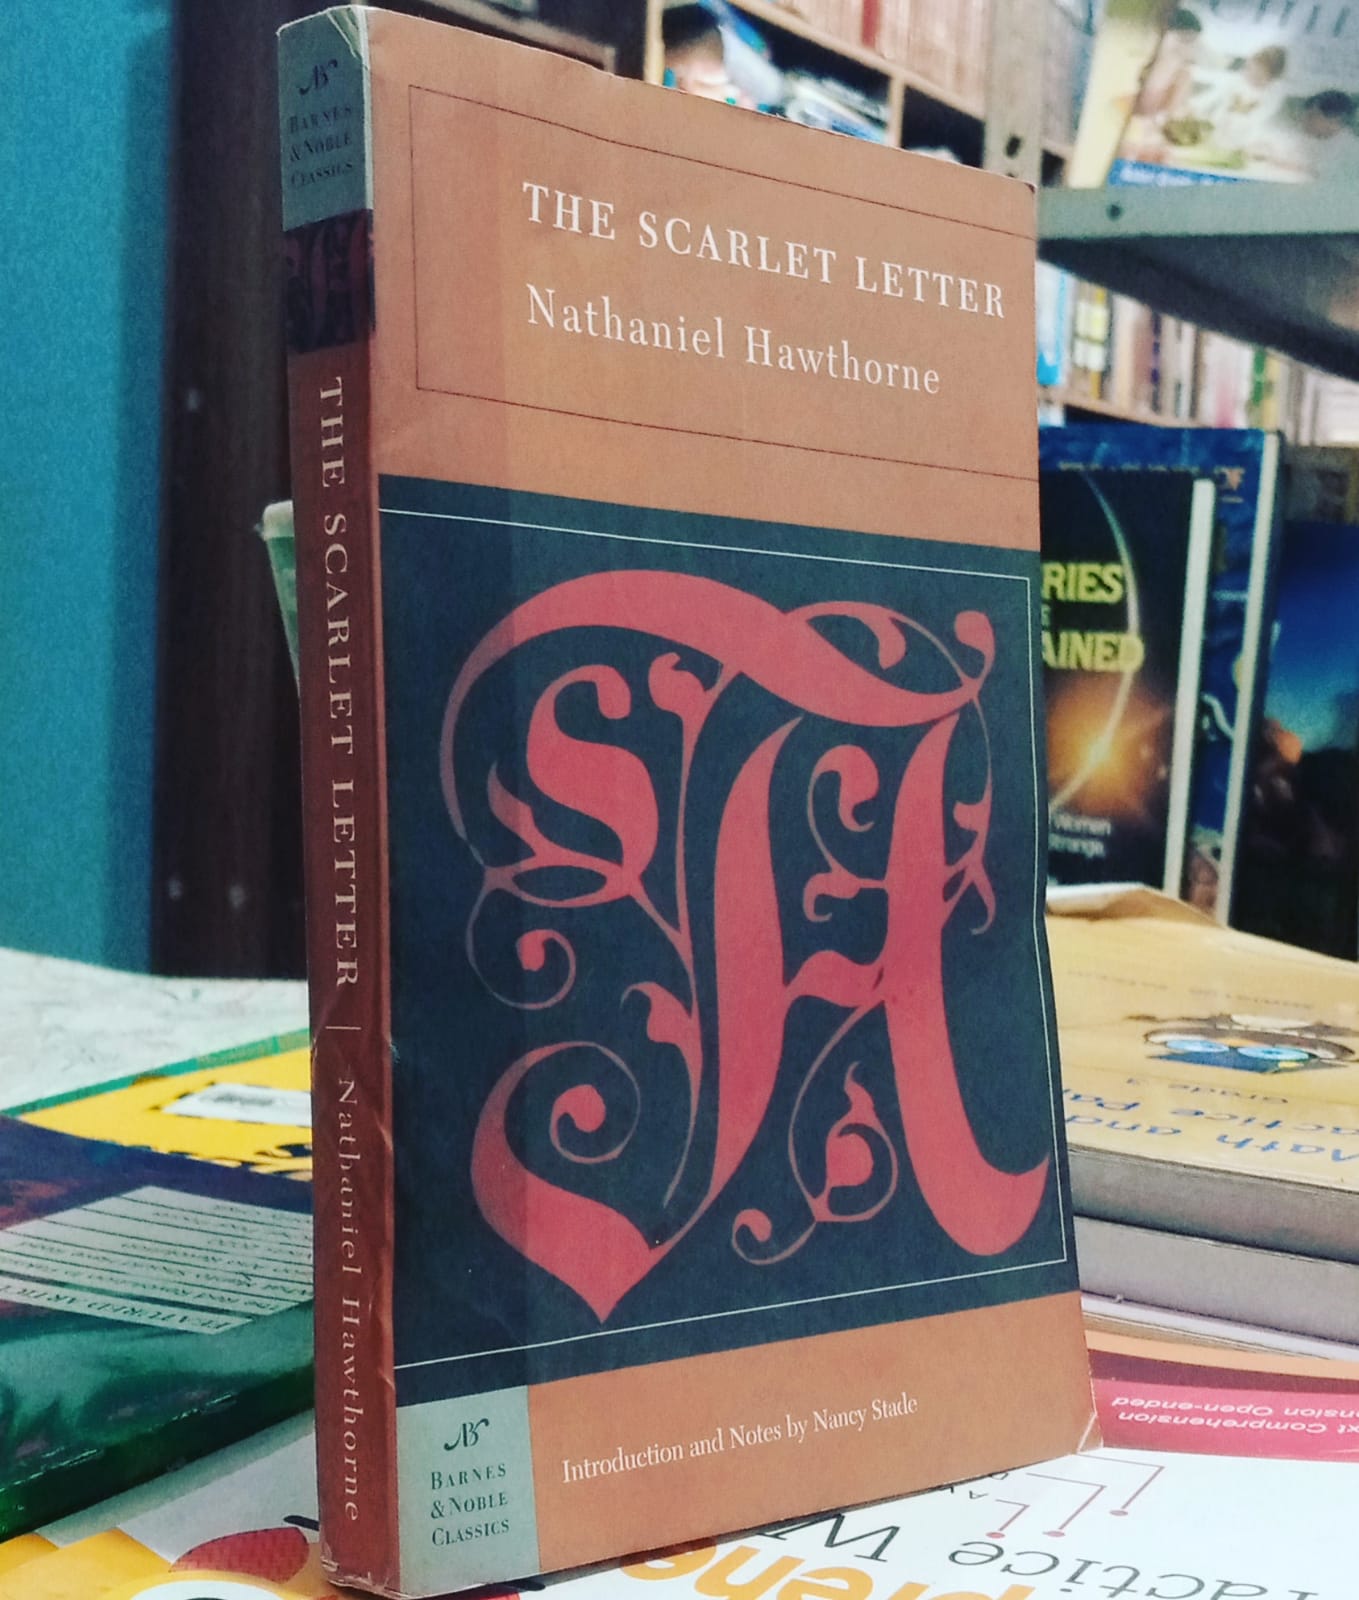 the scarlet letter by nathaniel hawthorne barnes & noble classics. original paperback